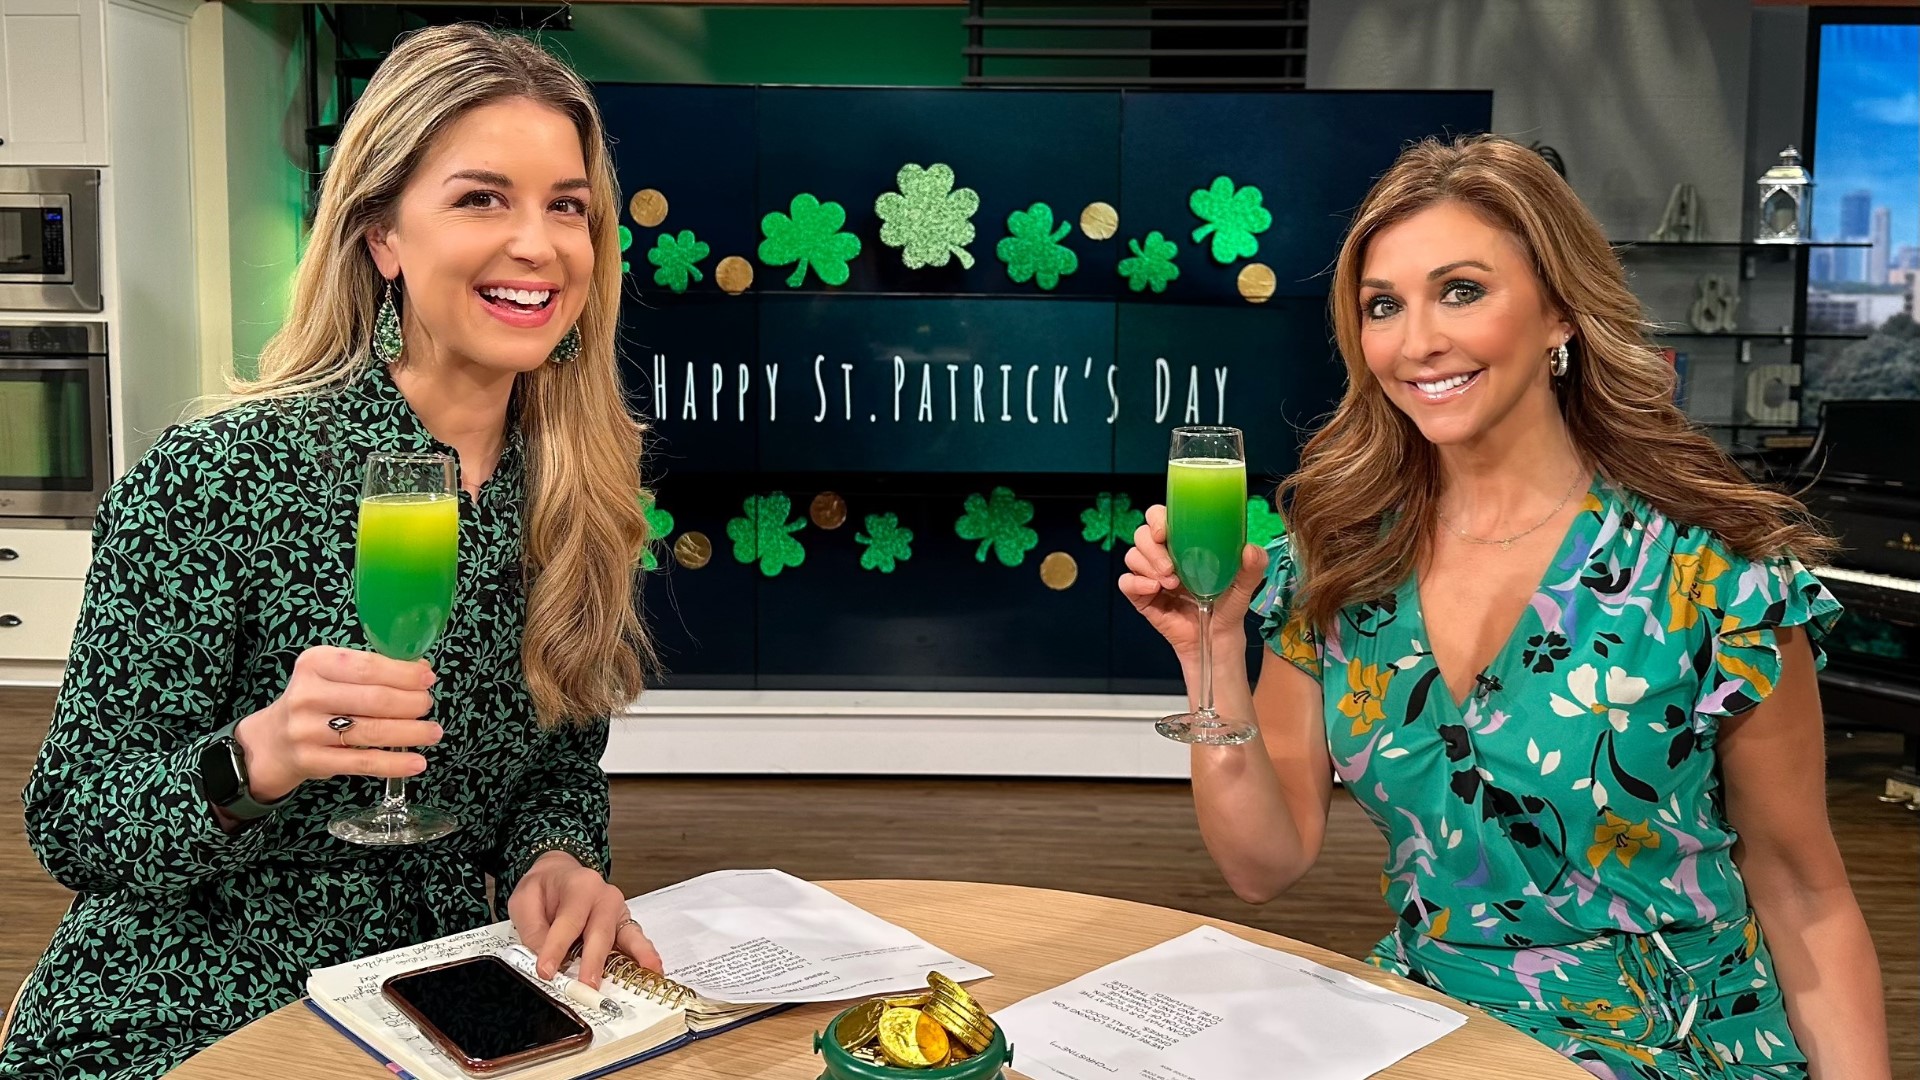 Atlanta & Company kicks off their St. Paddy's Day show with heartwarming stories and sweet sips.